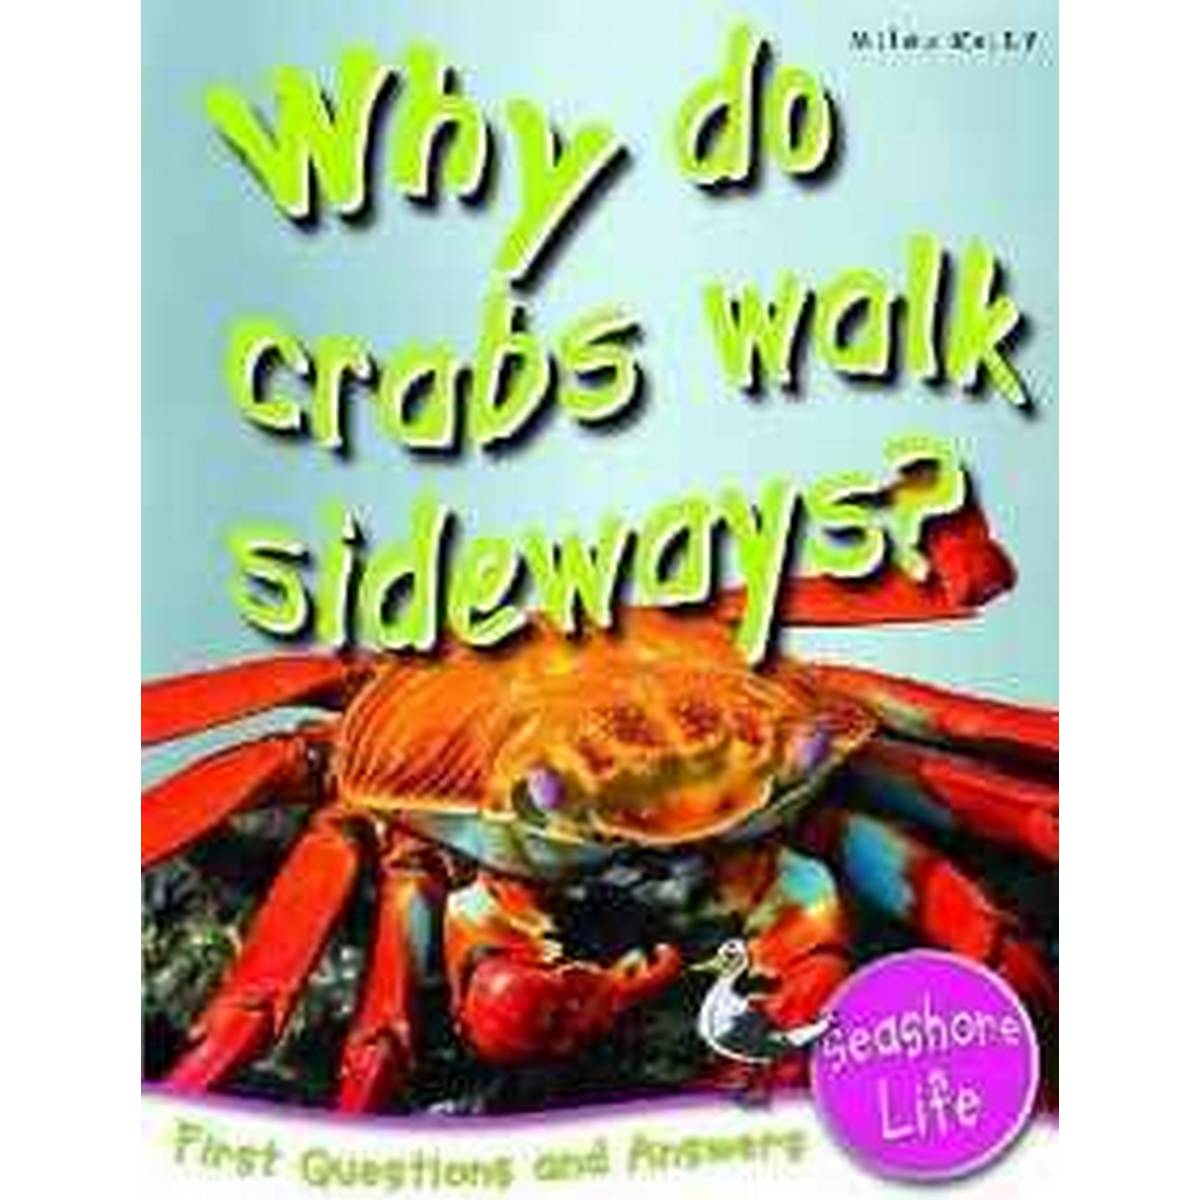 Seashore Life: Why Do Crabs Walk Sideways? (First Questions and Answers)